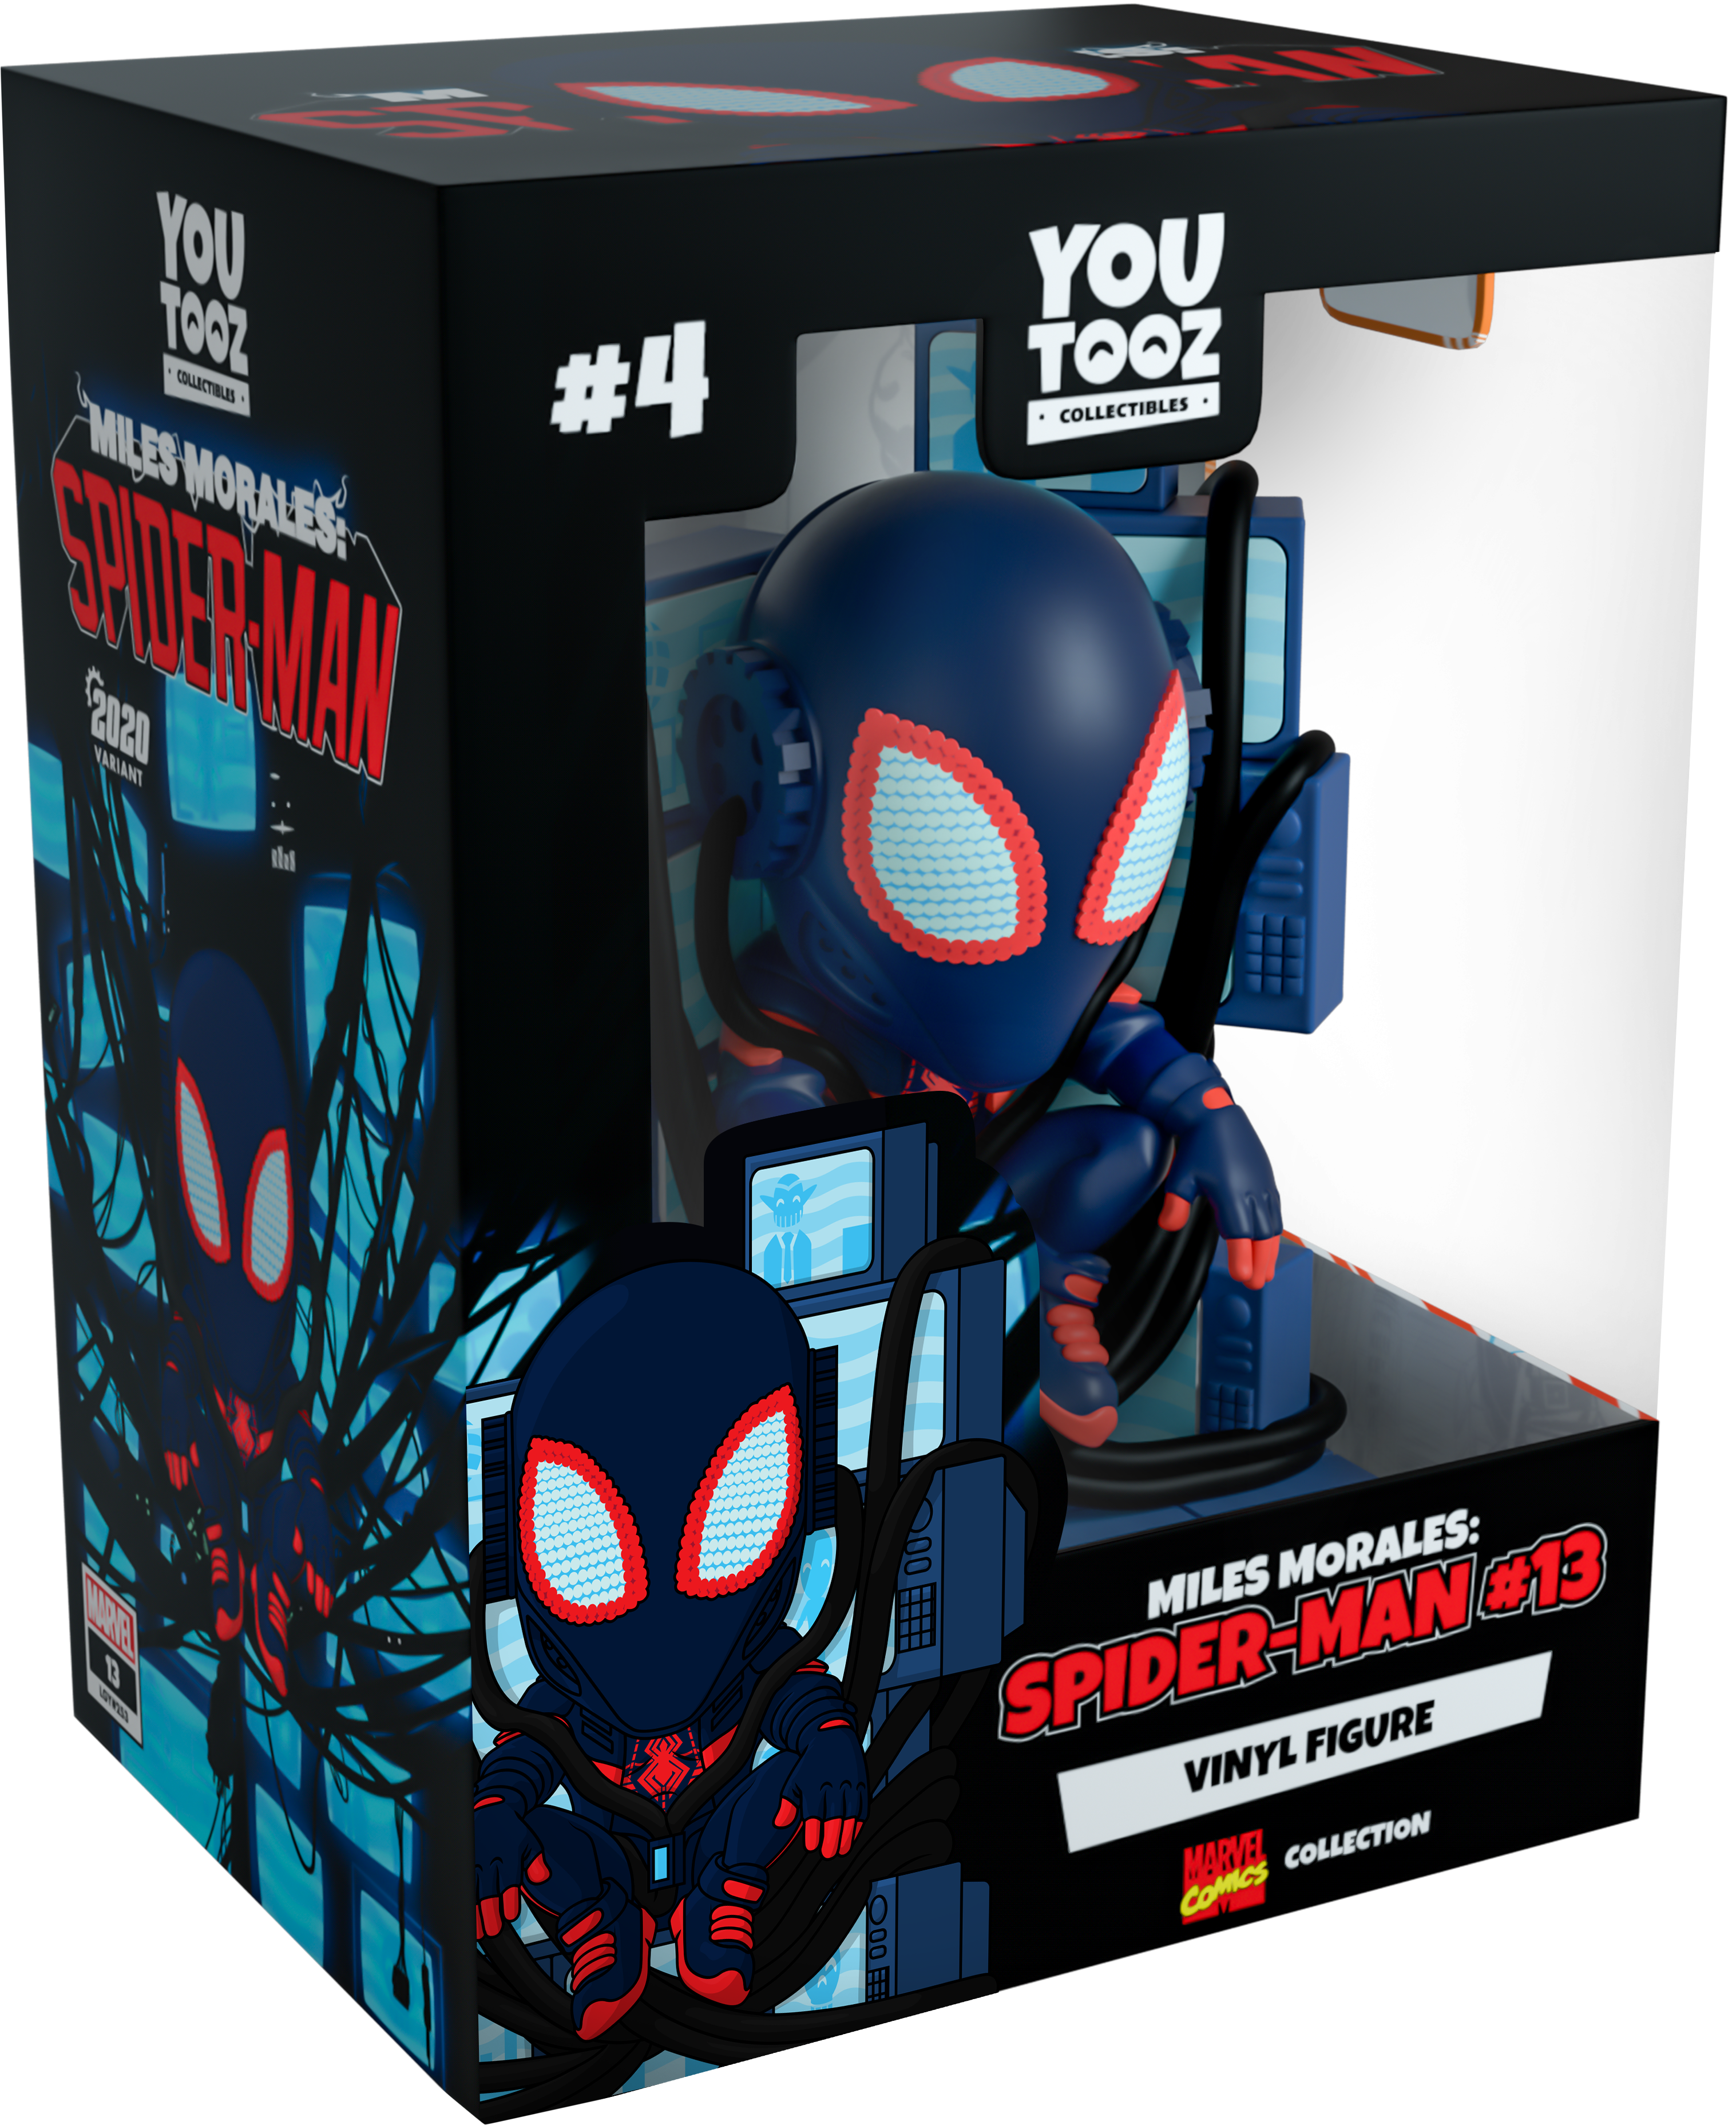 Miles Morales #13 – Youtooz Collectibles